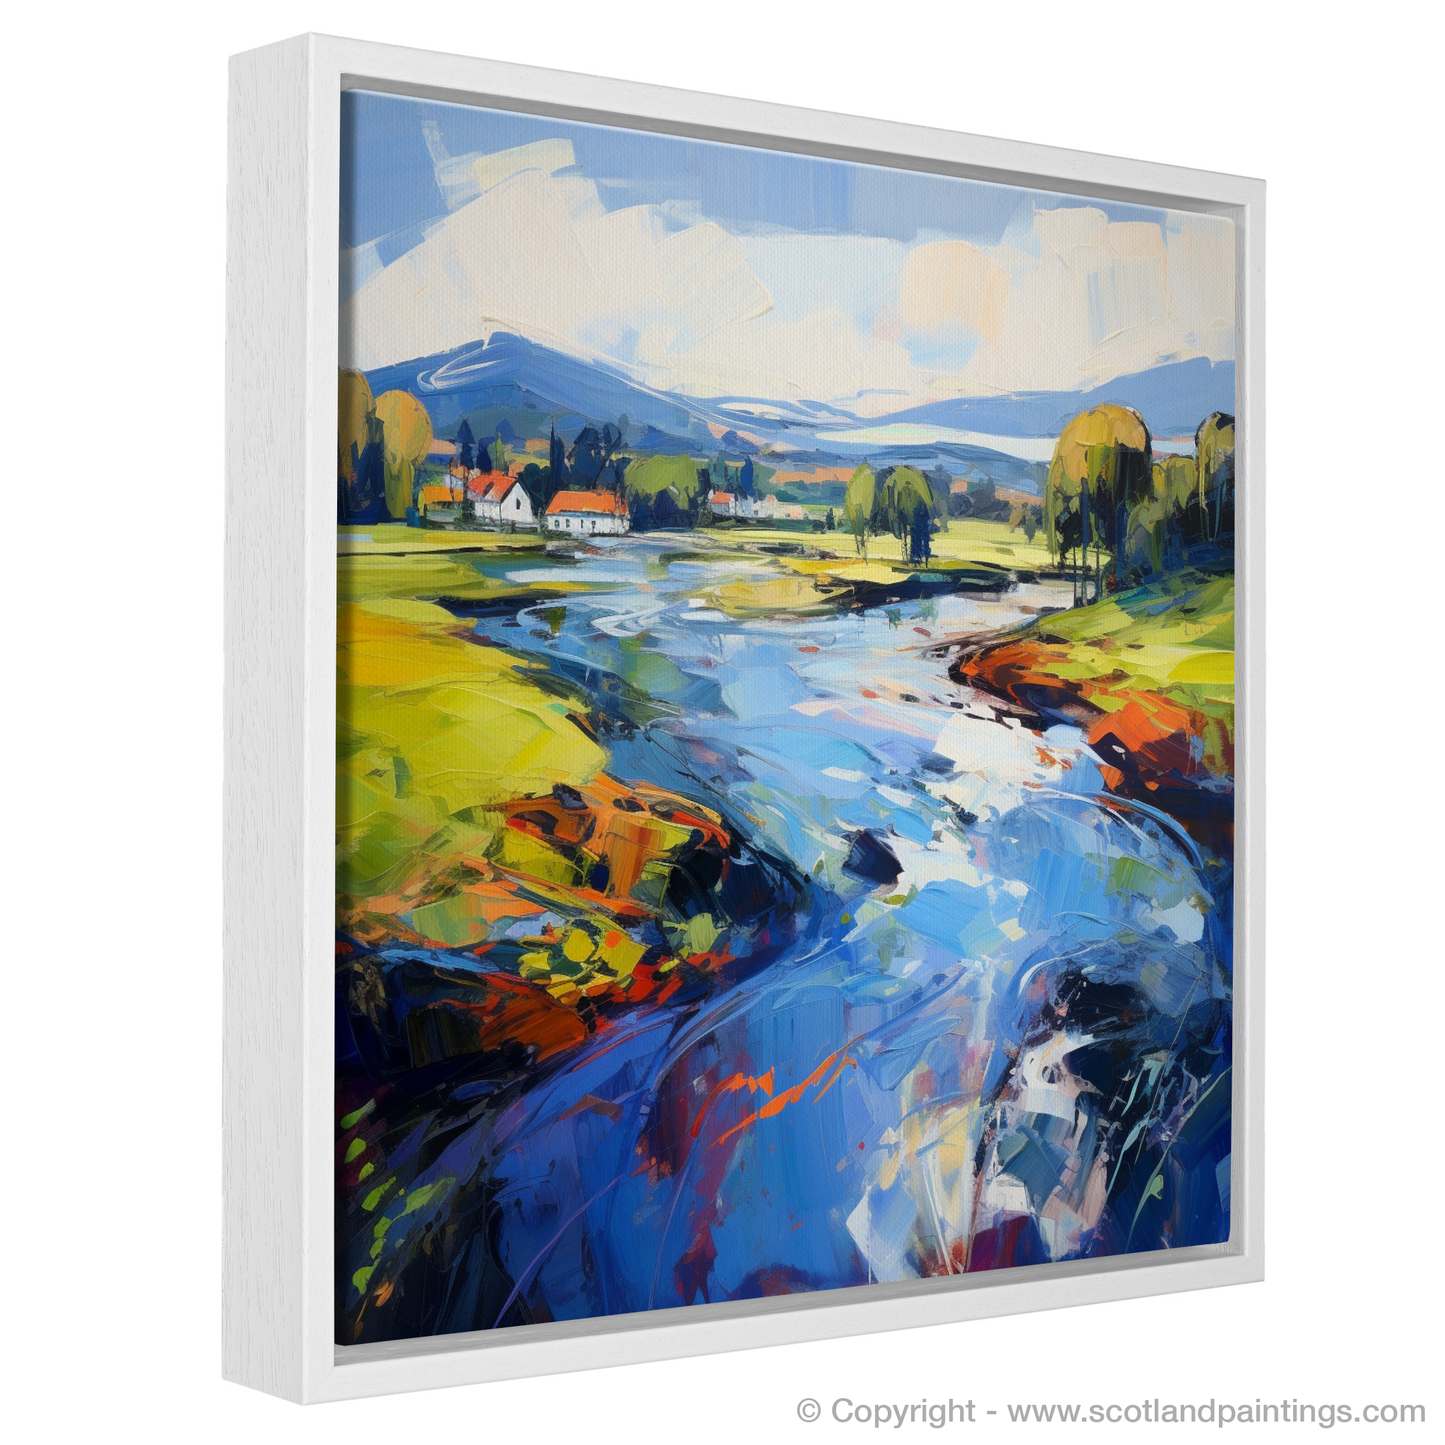 Painting and Art Print of River Leven, West Dunbartonshire entitled "Vibrant Expression: The Dance of River Leven".